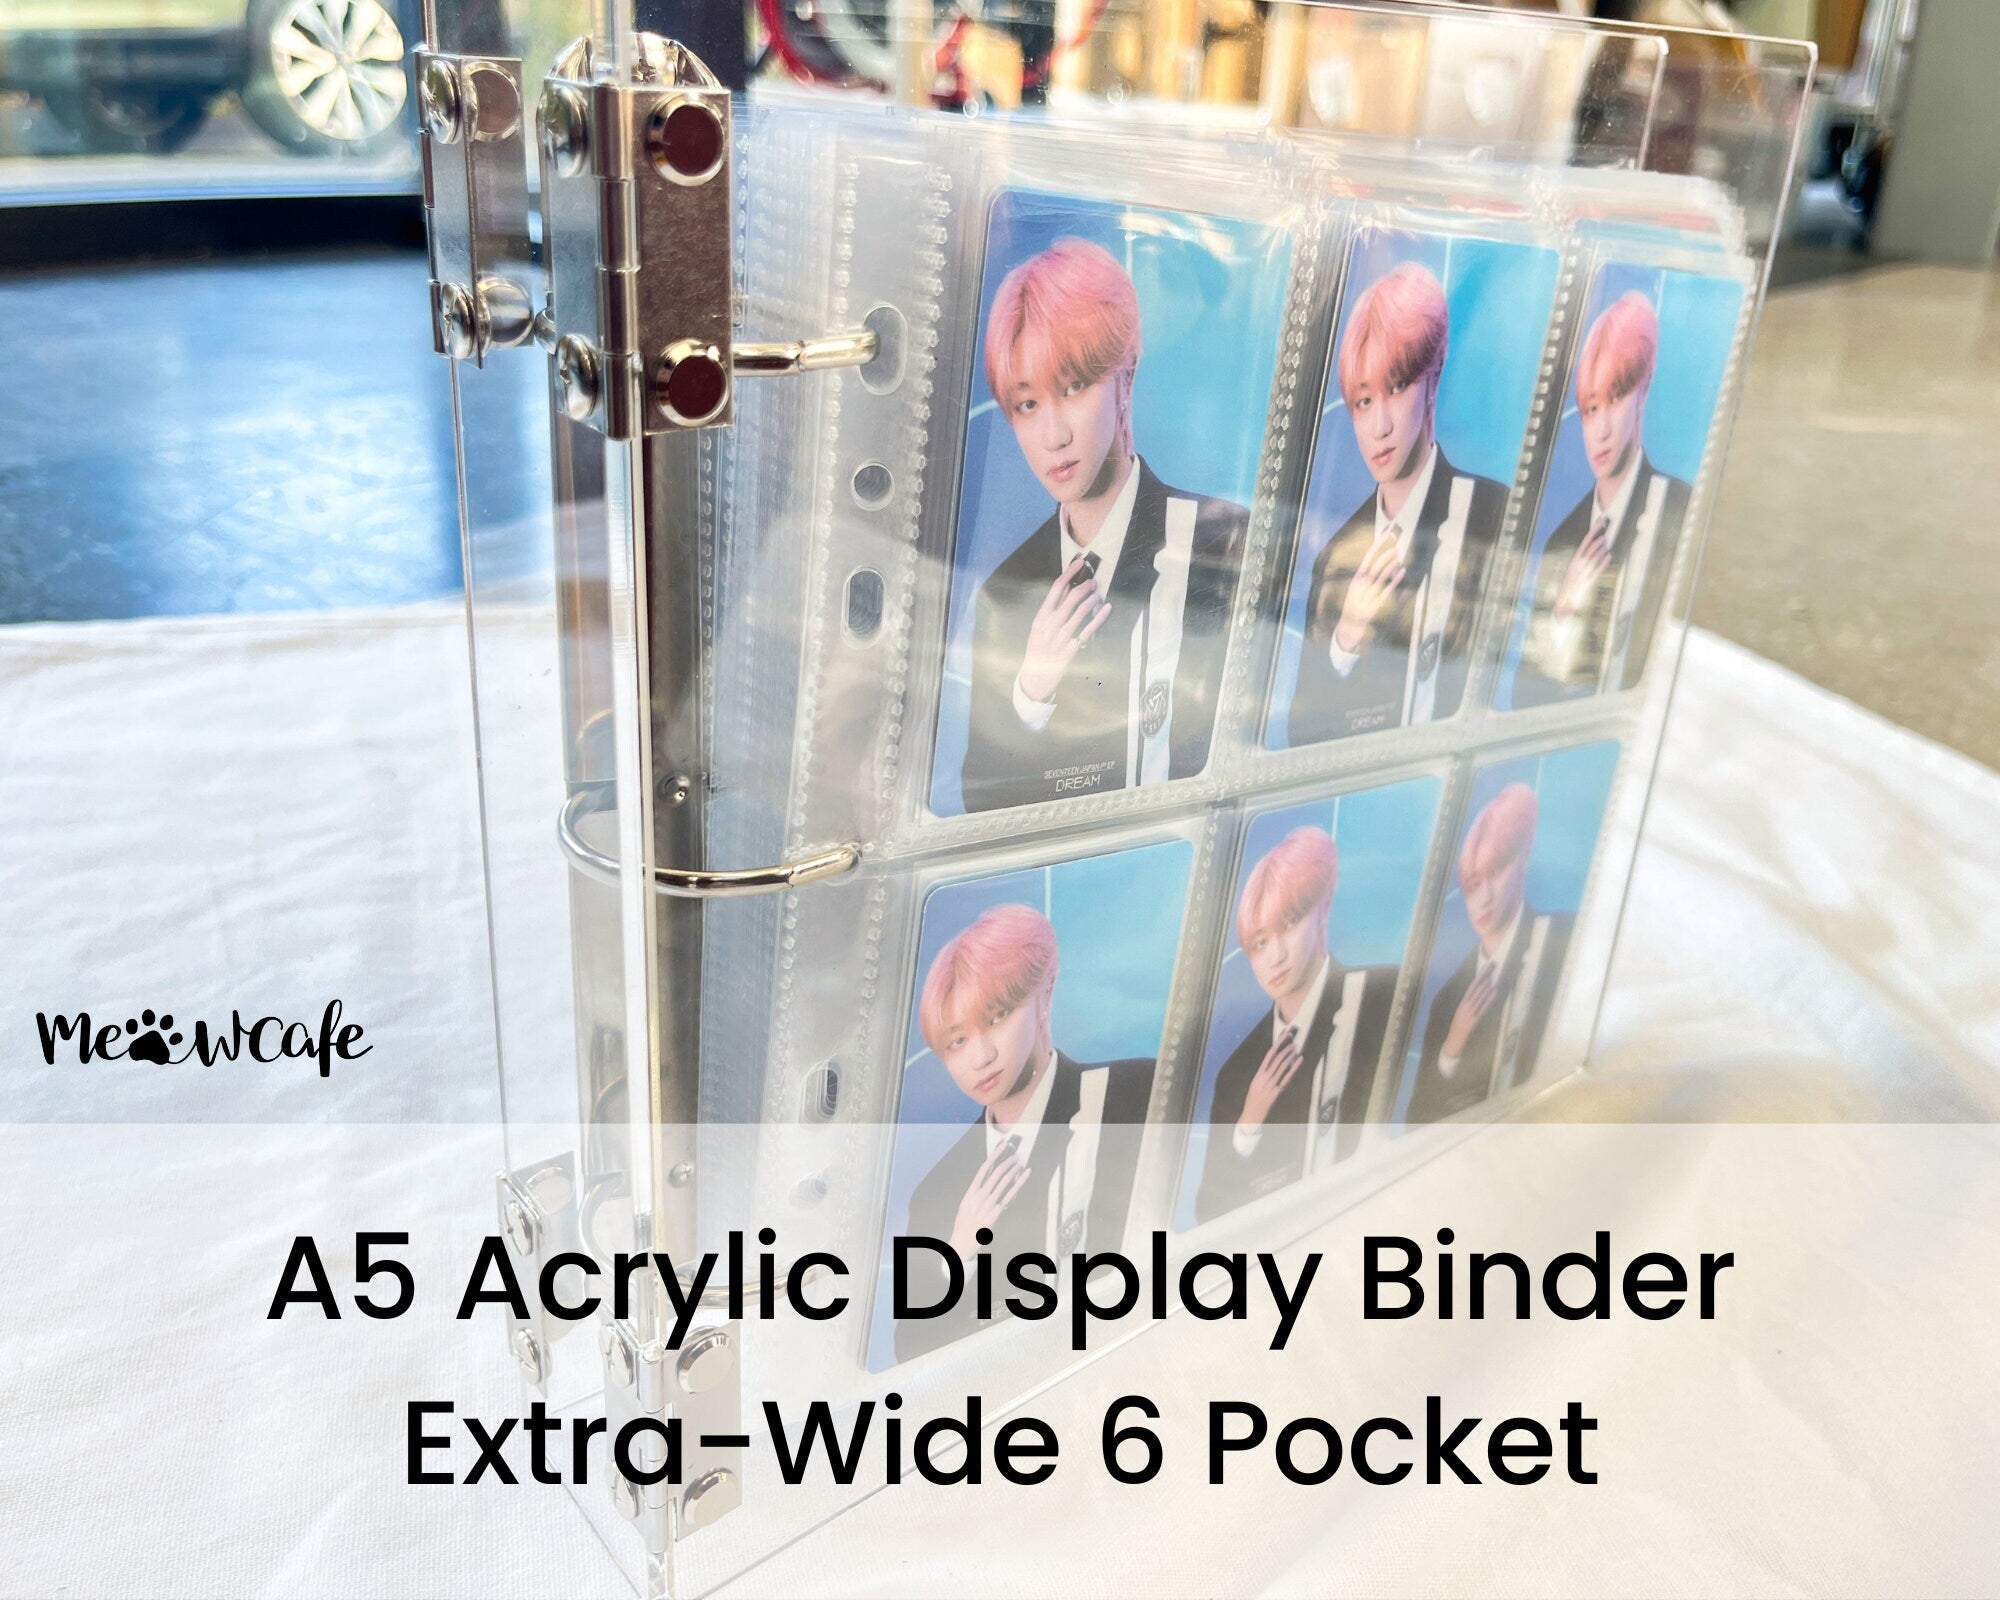 Meowcafe Premium A5 Acrylic Extra-Wide 6 Pocket Binder 3 x 1.5 inch D-Ring Large Capacity OT5 OT6 Kpop Photocard Binder